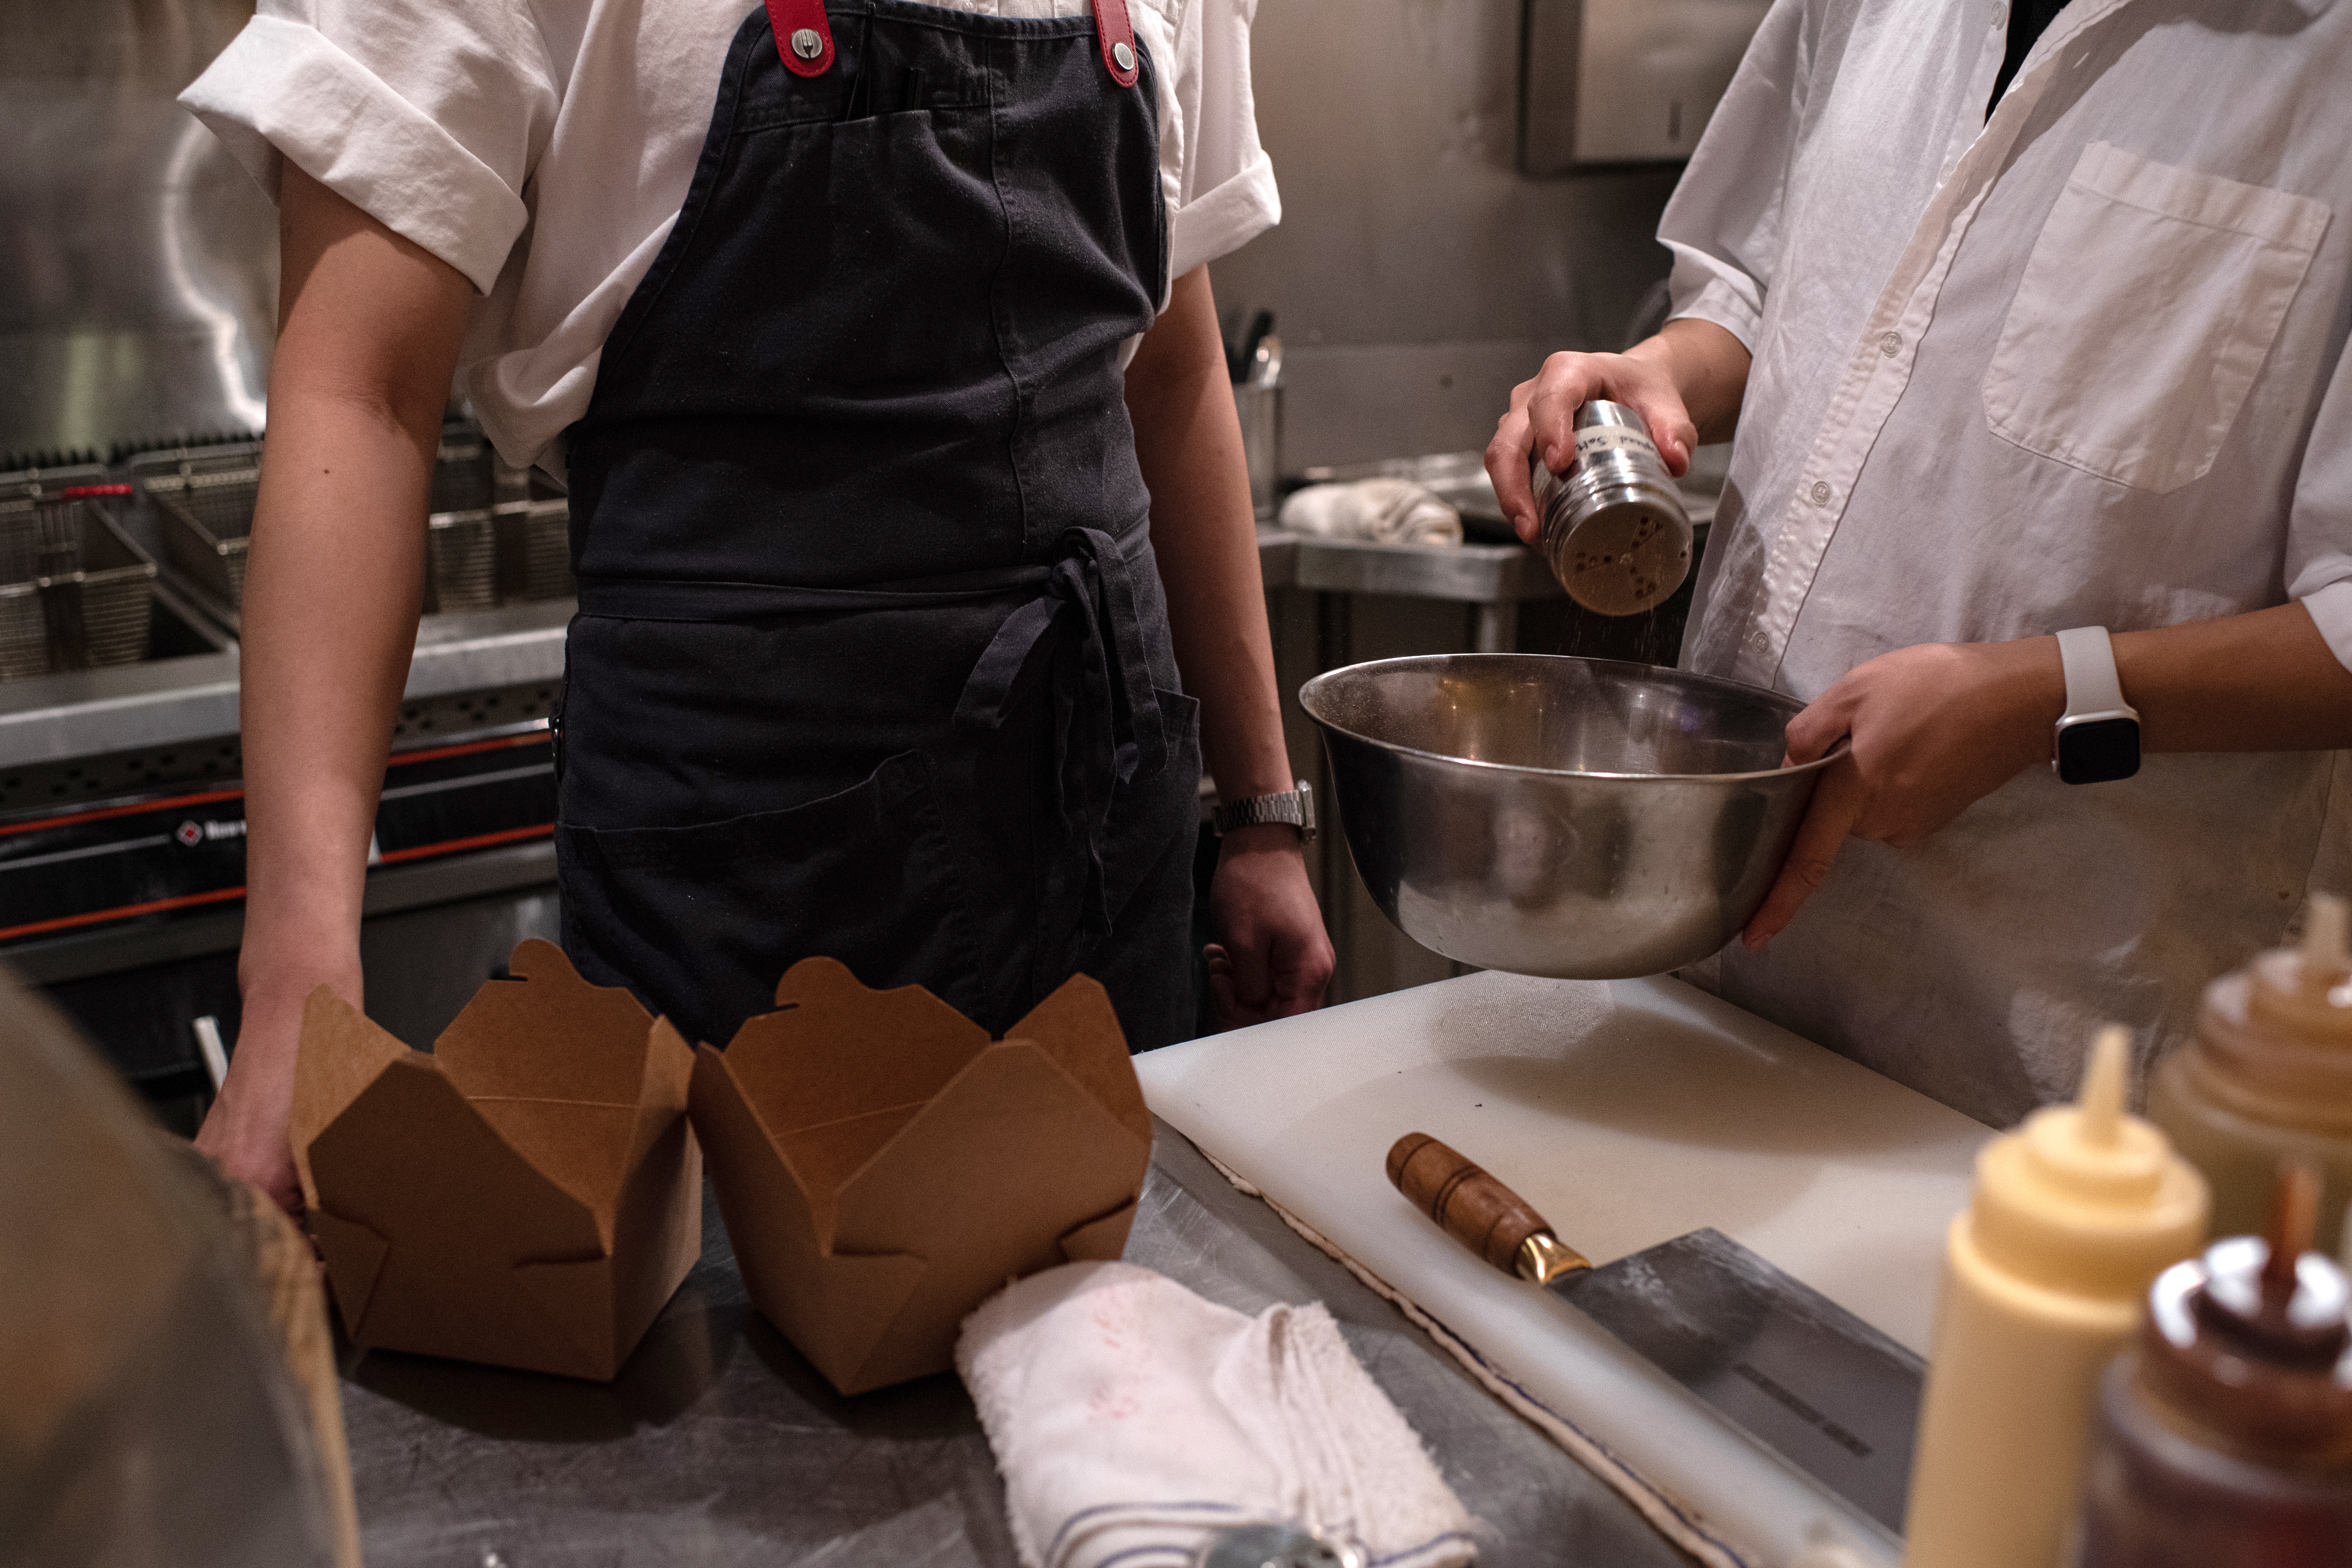 Two restaurant workers in a kitchen standing next to empty take-out containers; one figure is adding spices to a metal bowl.